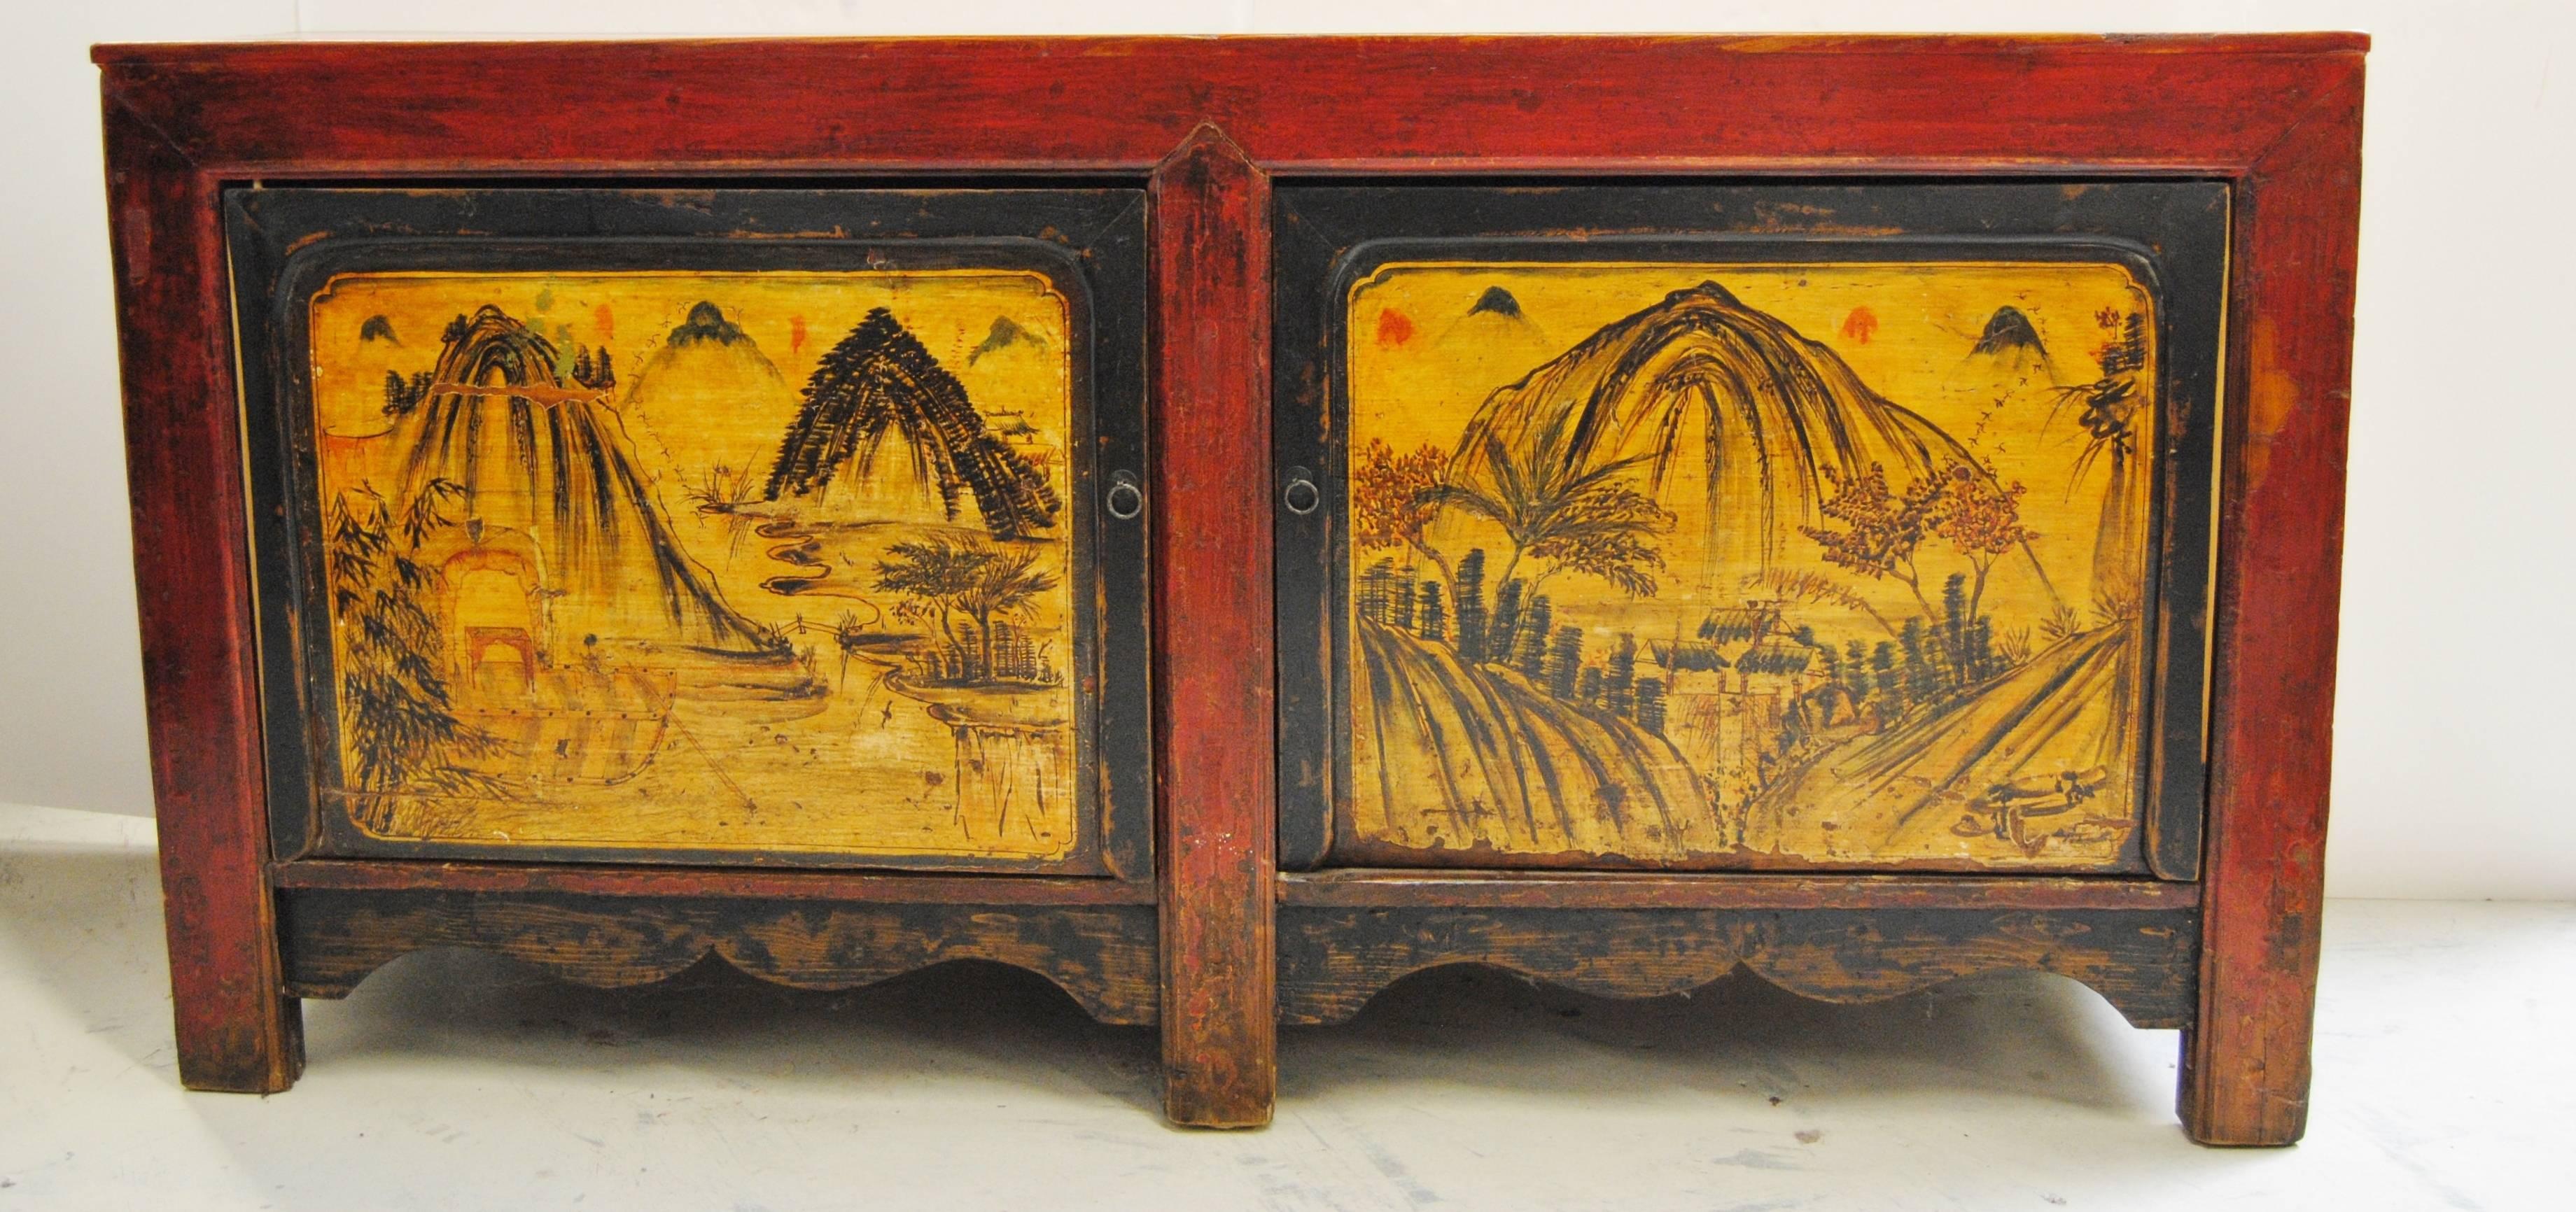 Double bay antique Western Chinese elmwood cabinet with original artwork. Colors are strong and vibrant with striking scenes. The cabinet has good storage with a newly added center shelf.  